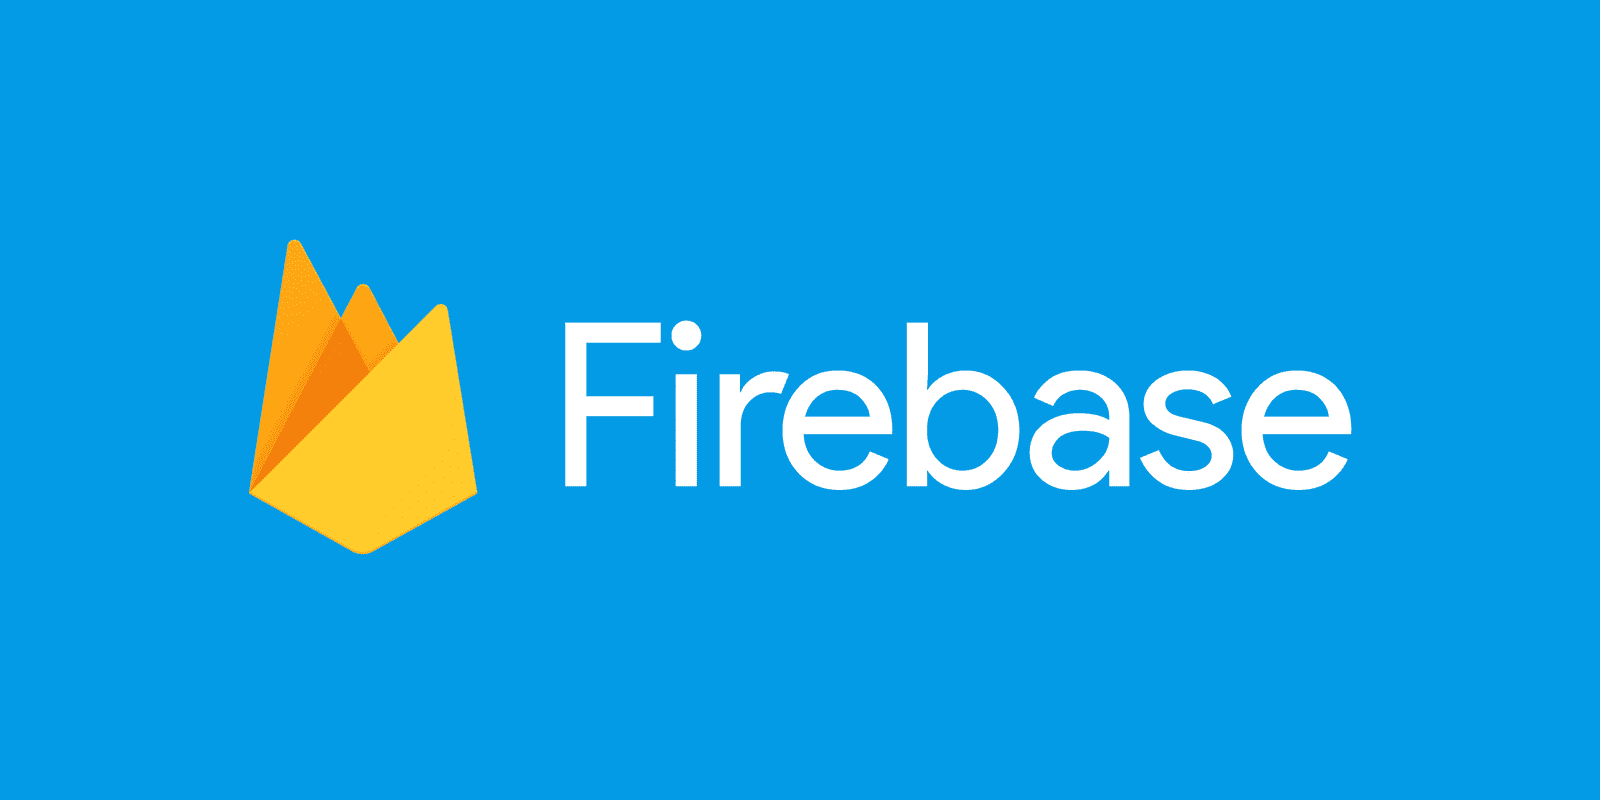 Everything you need to know about Firebase - Part 1